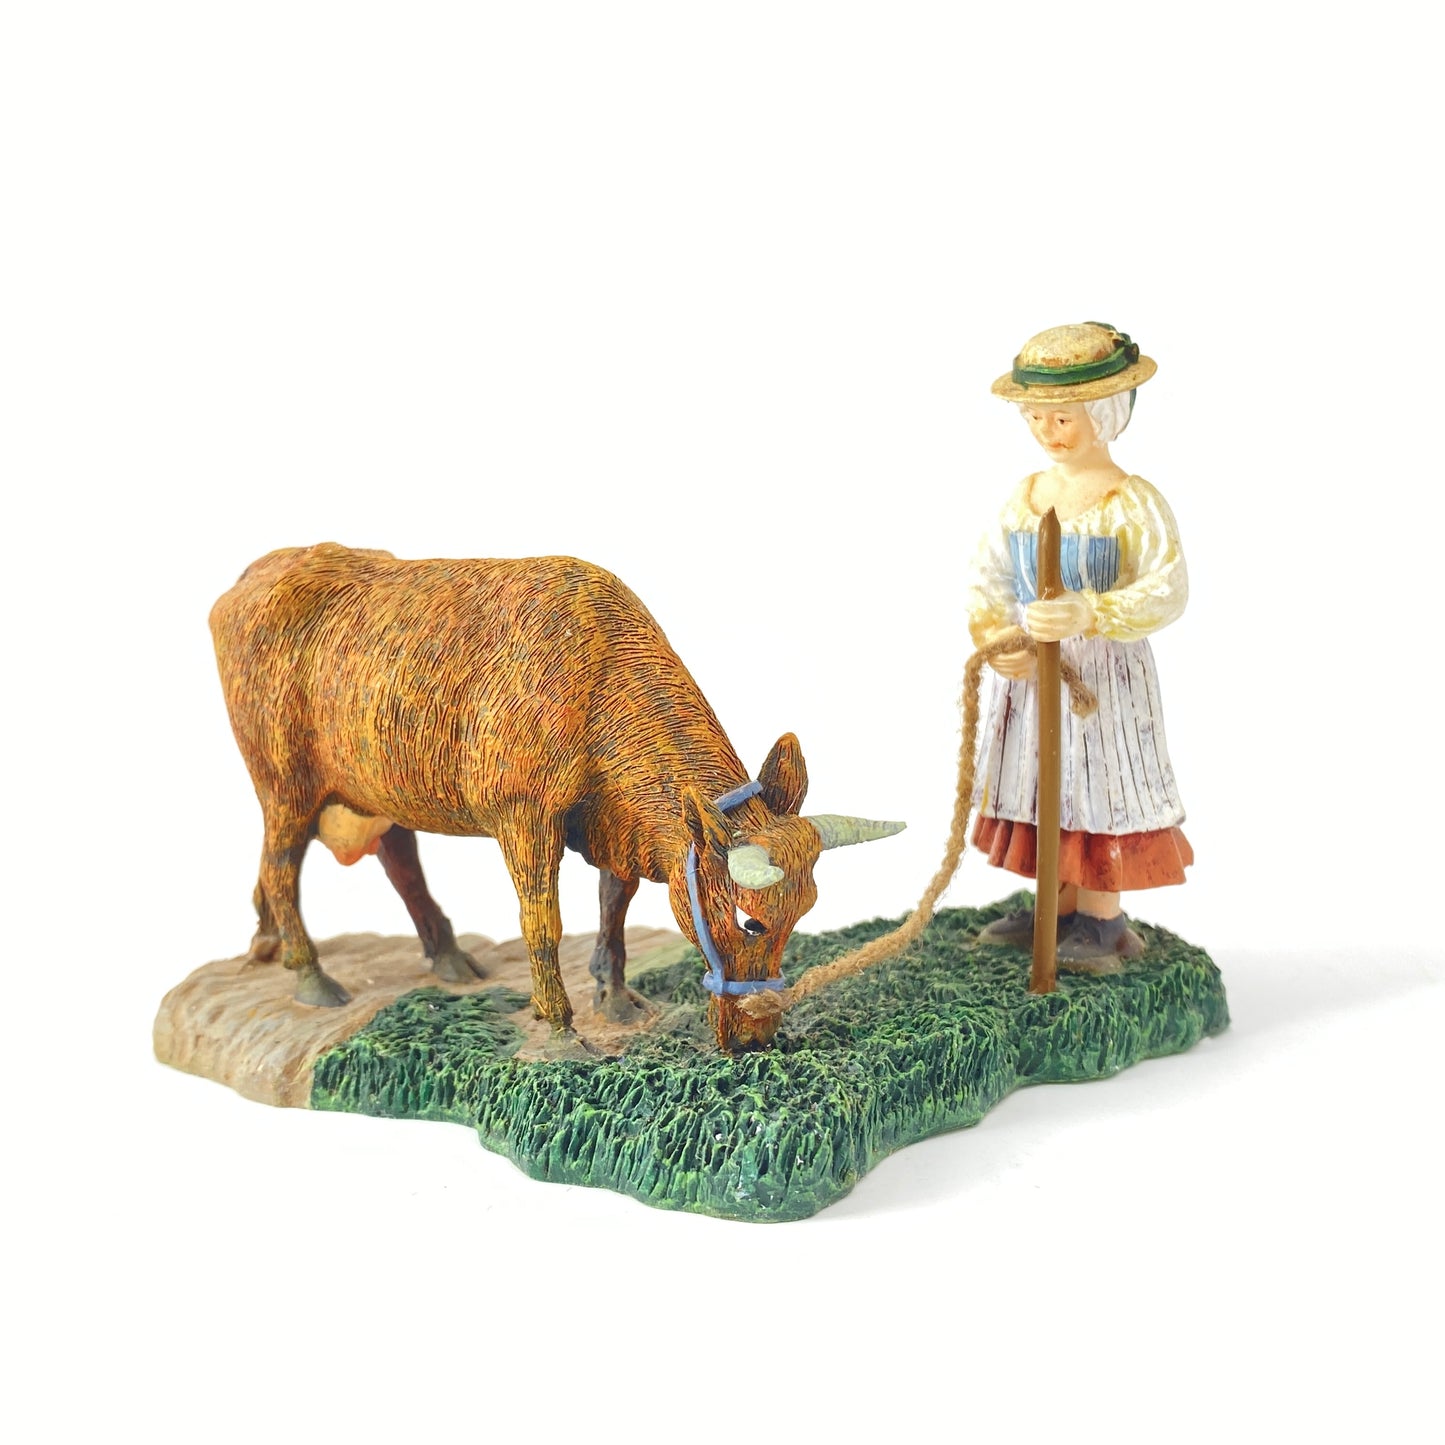 Lang & Wise Dairymaid Leading Cow 30489710 W/ BOX